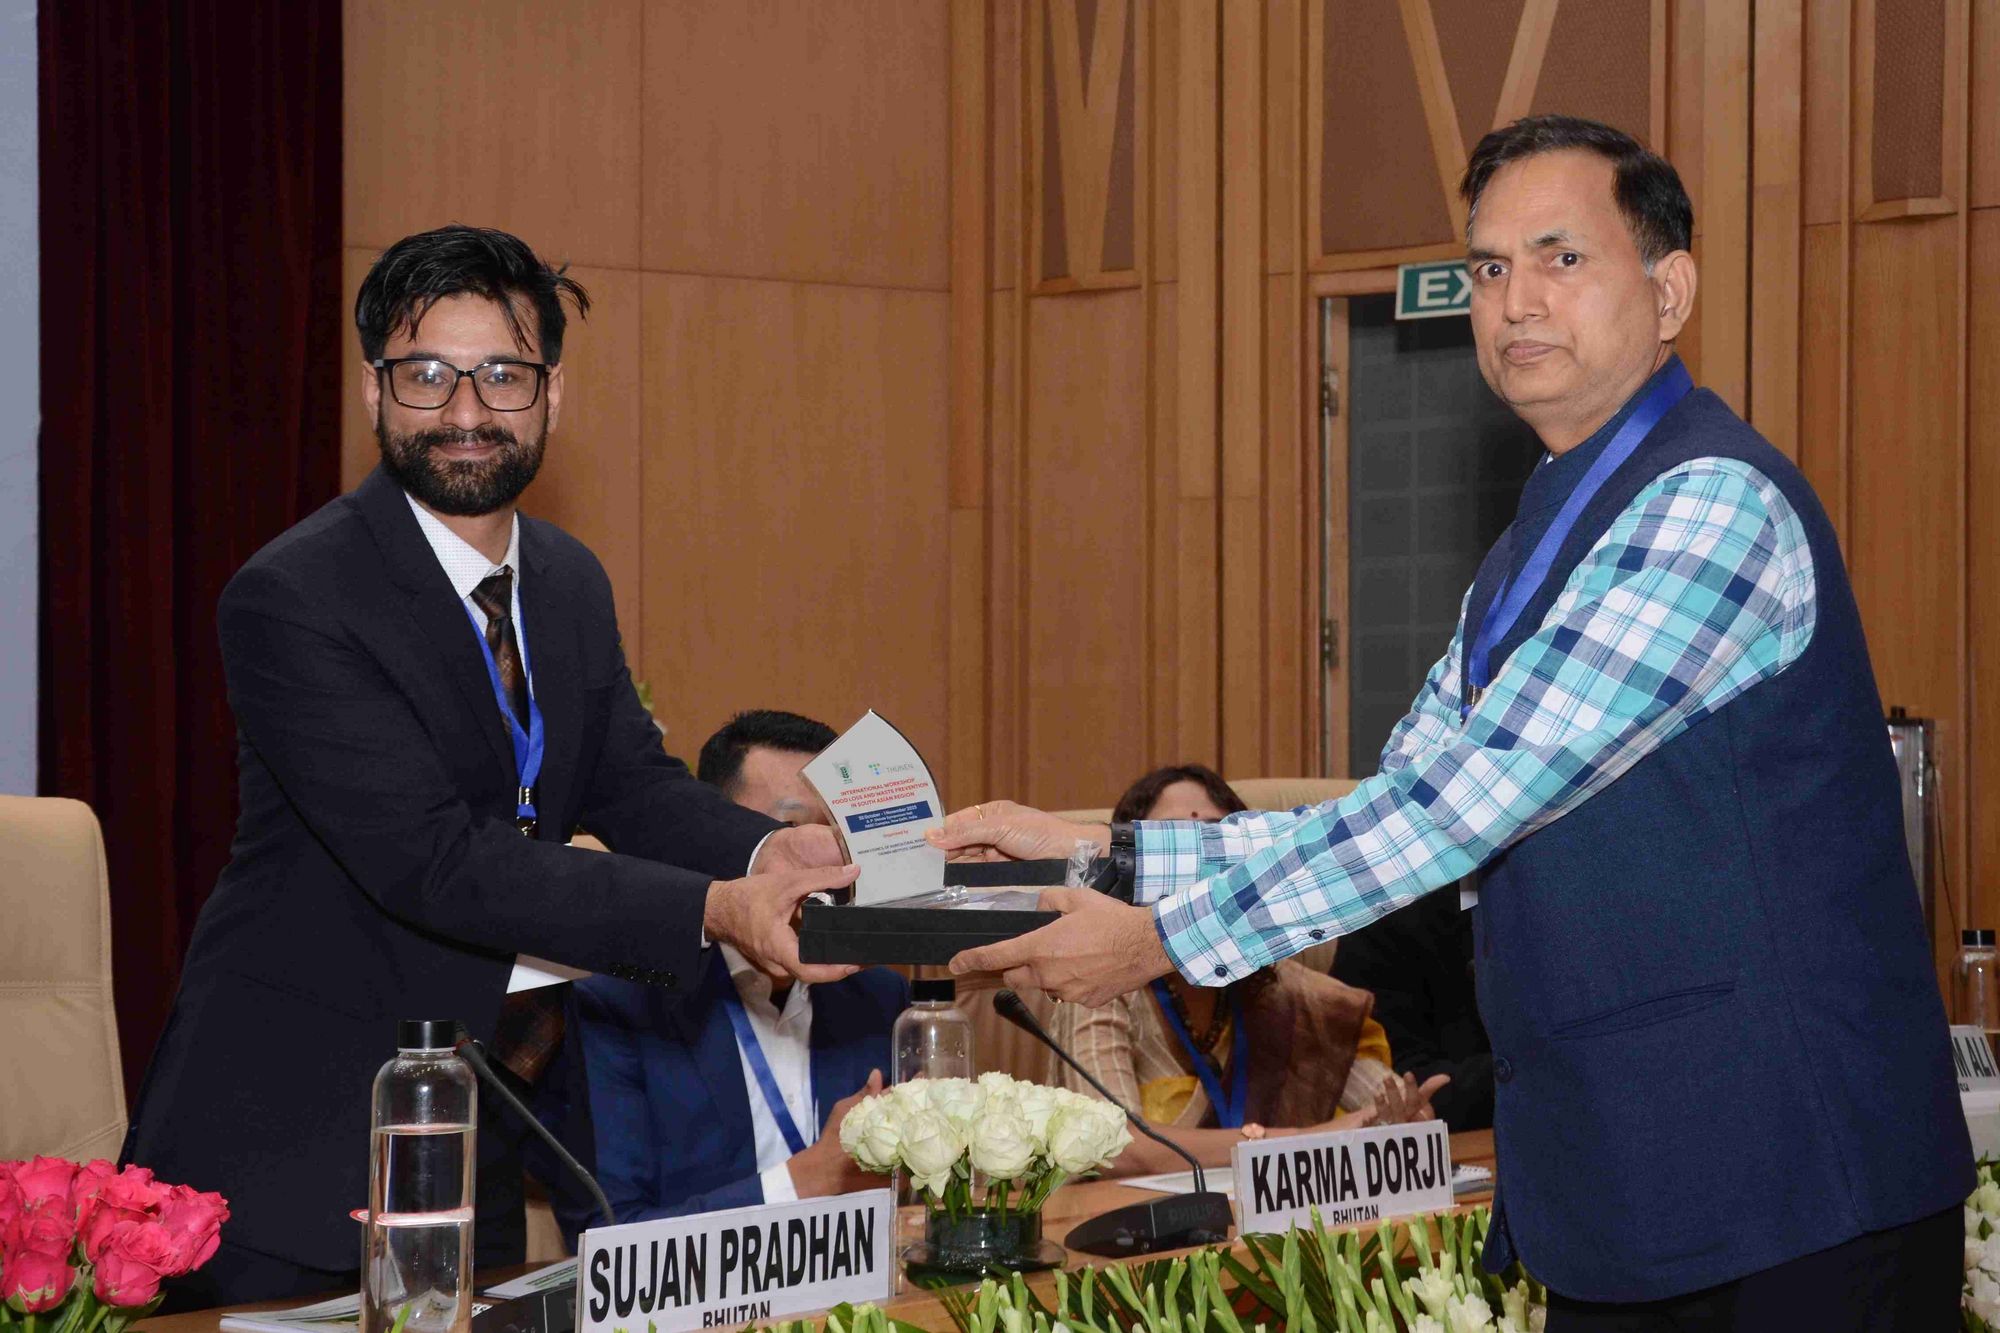 Mr. Sujan Pradhan, Chief Postproduction Officer from National Post Harvest Centre Bhutan, serving as co-chair receives his memento after the session.